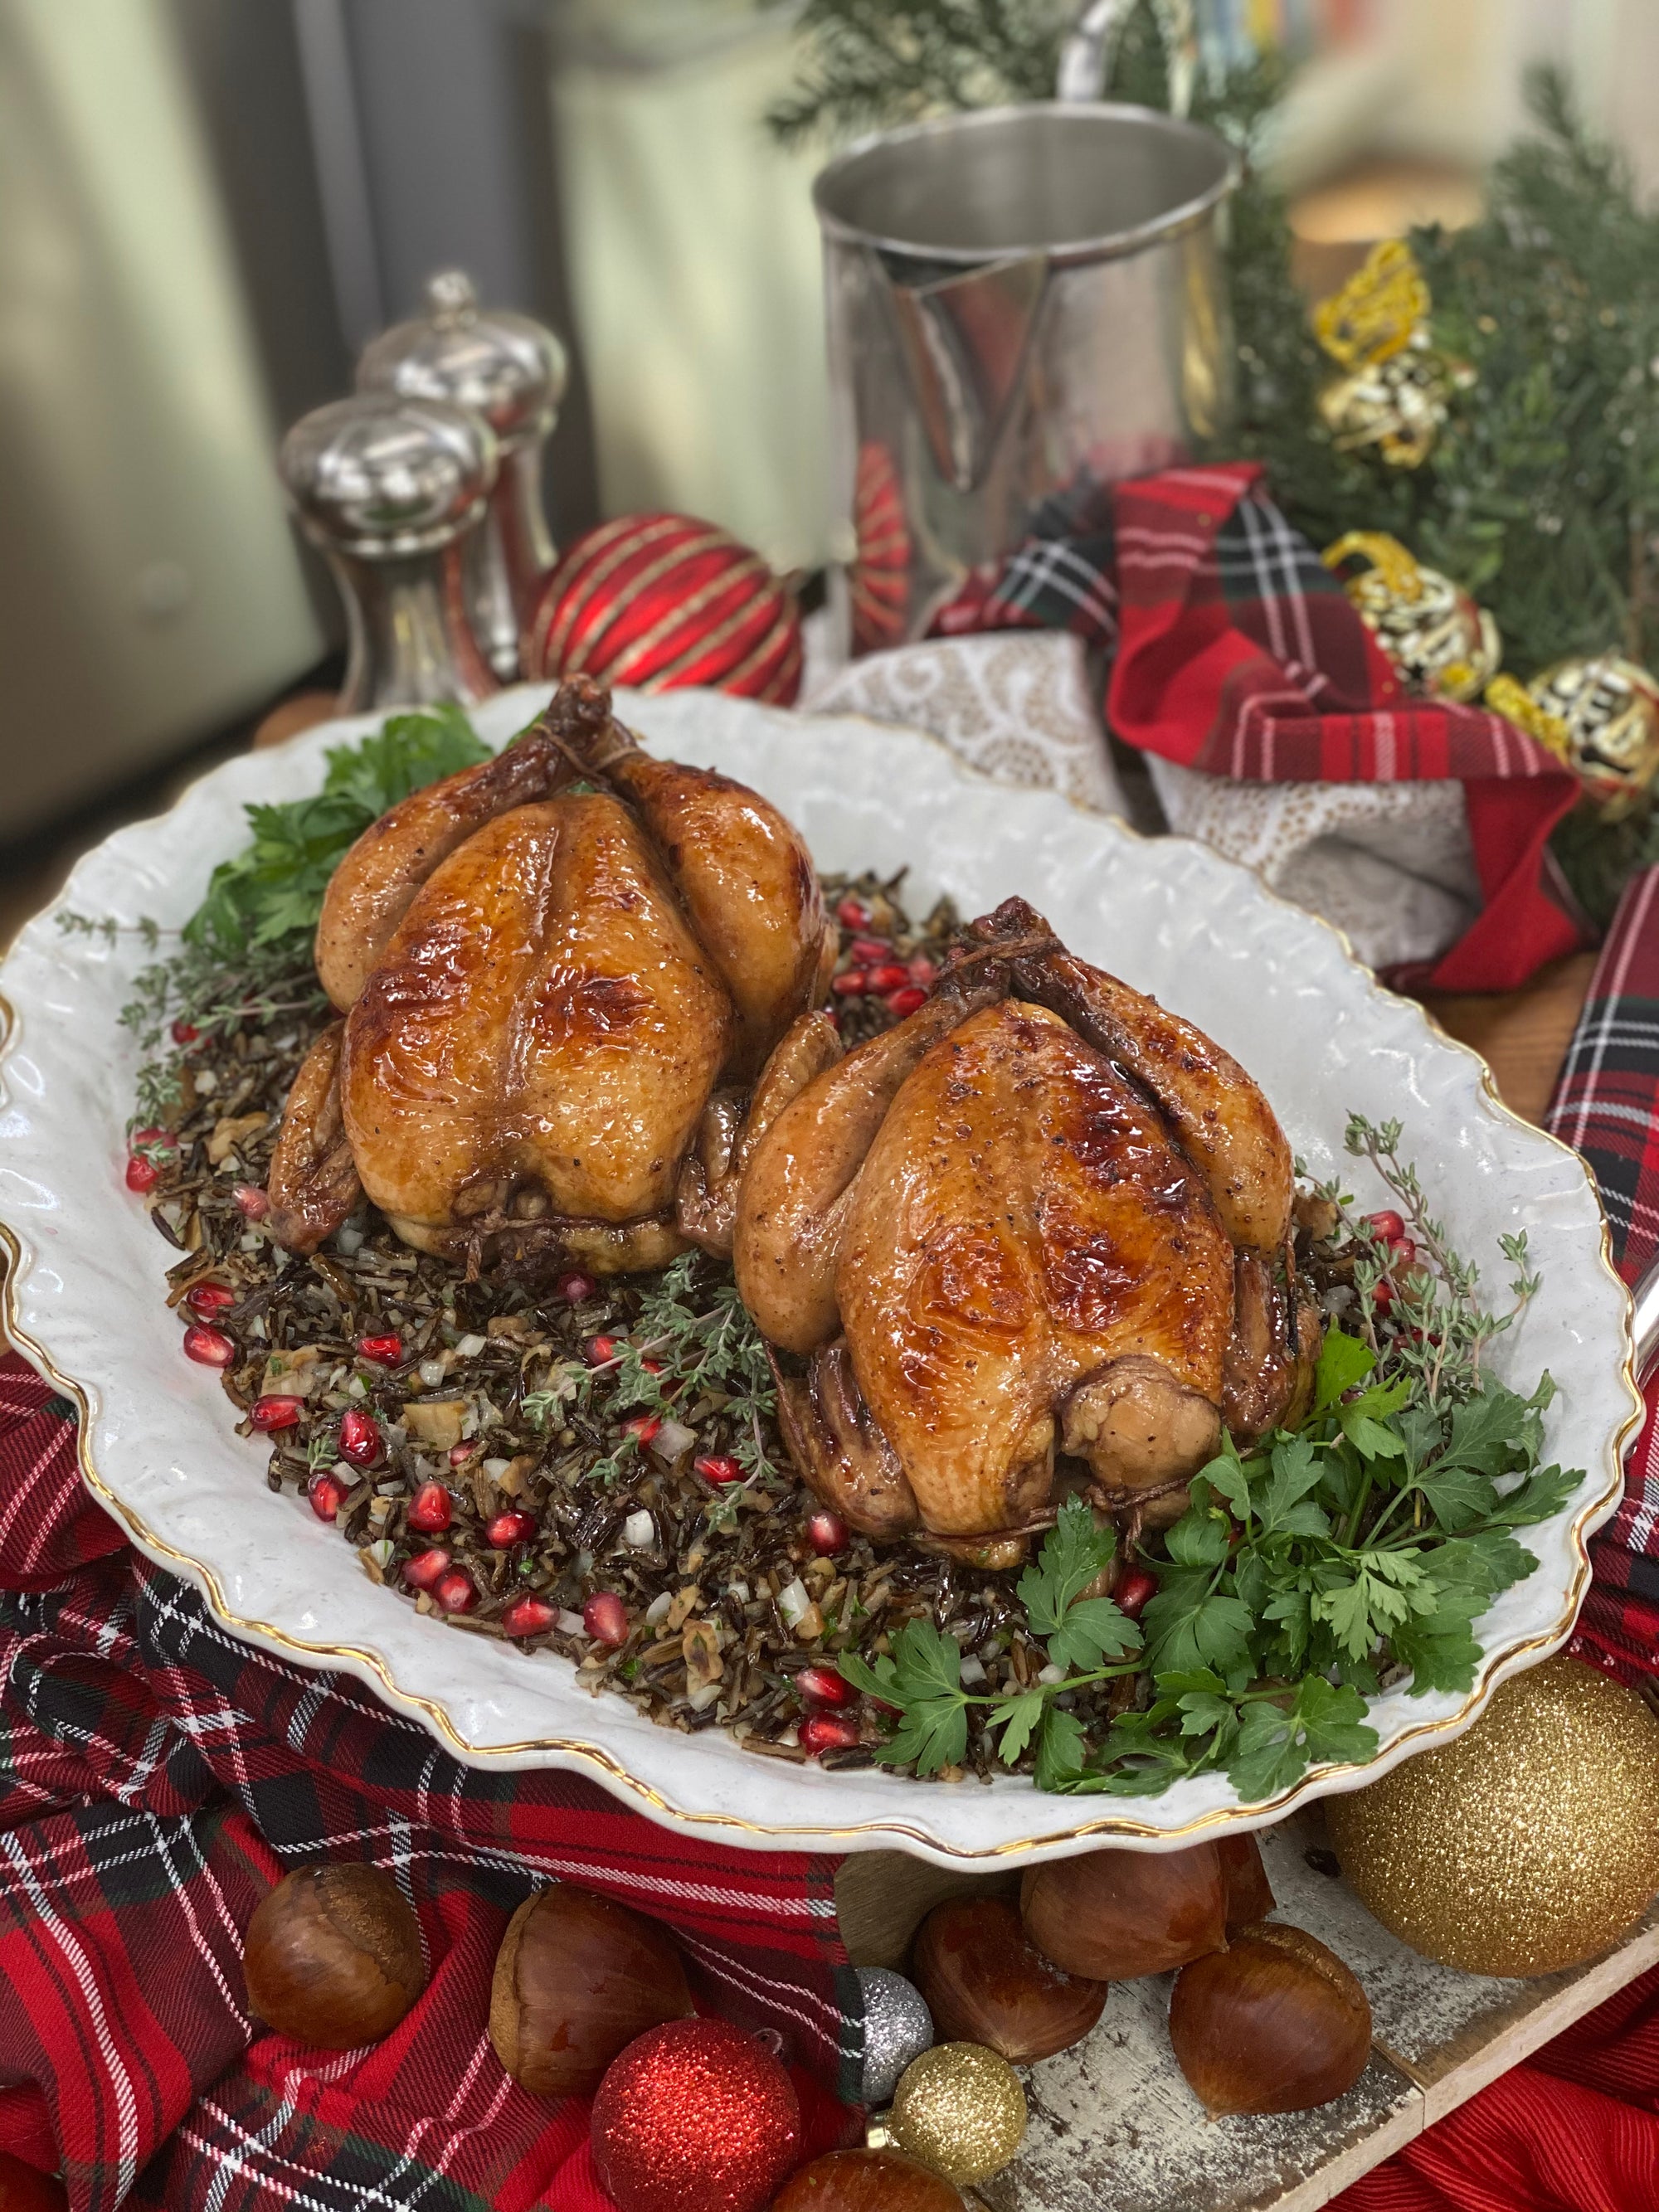 Pomegranate-Glazed Cornish Game Hens with Wild Rice and Chestnut Stuffing